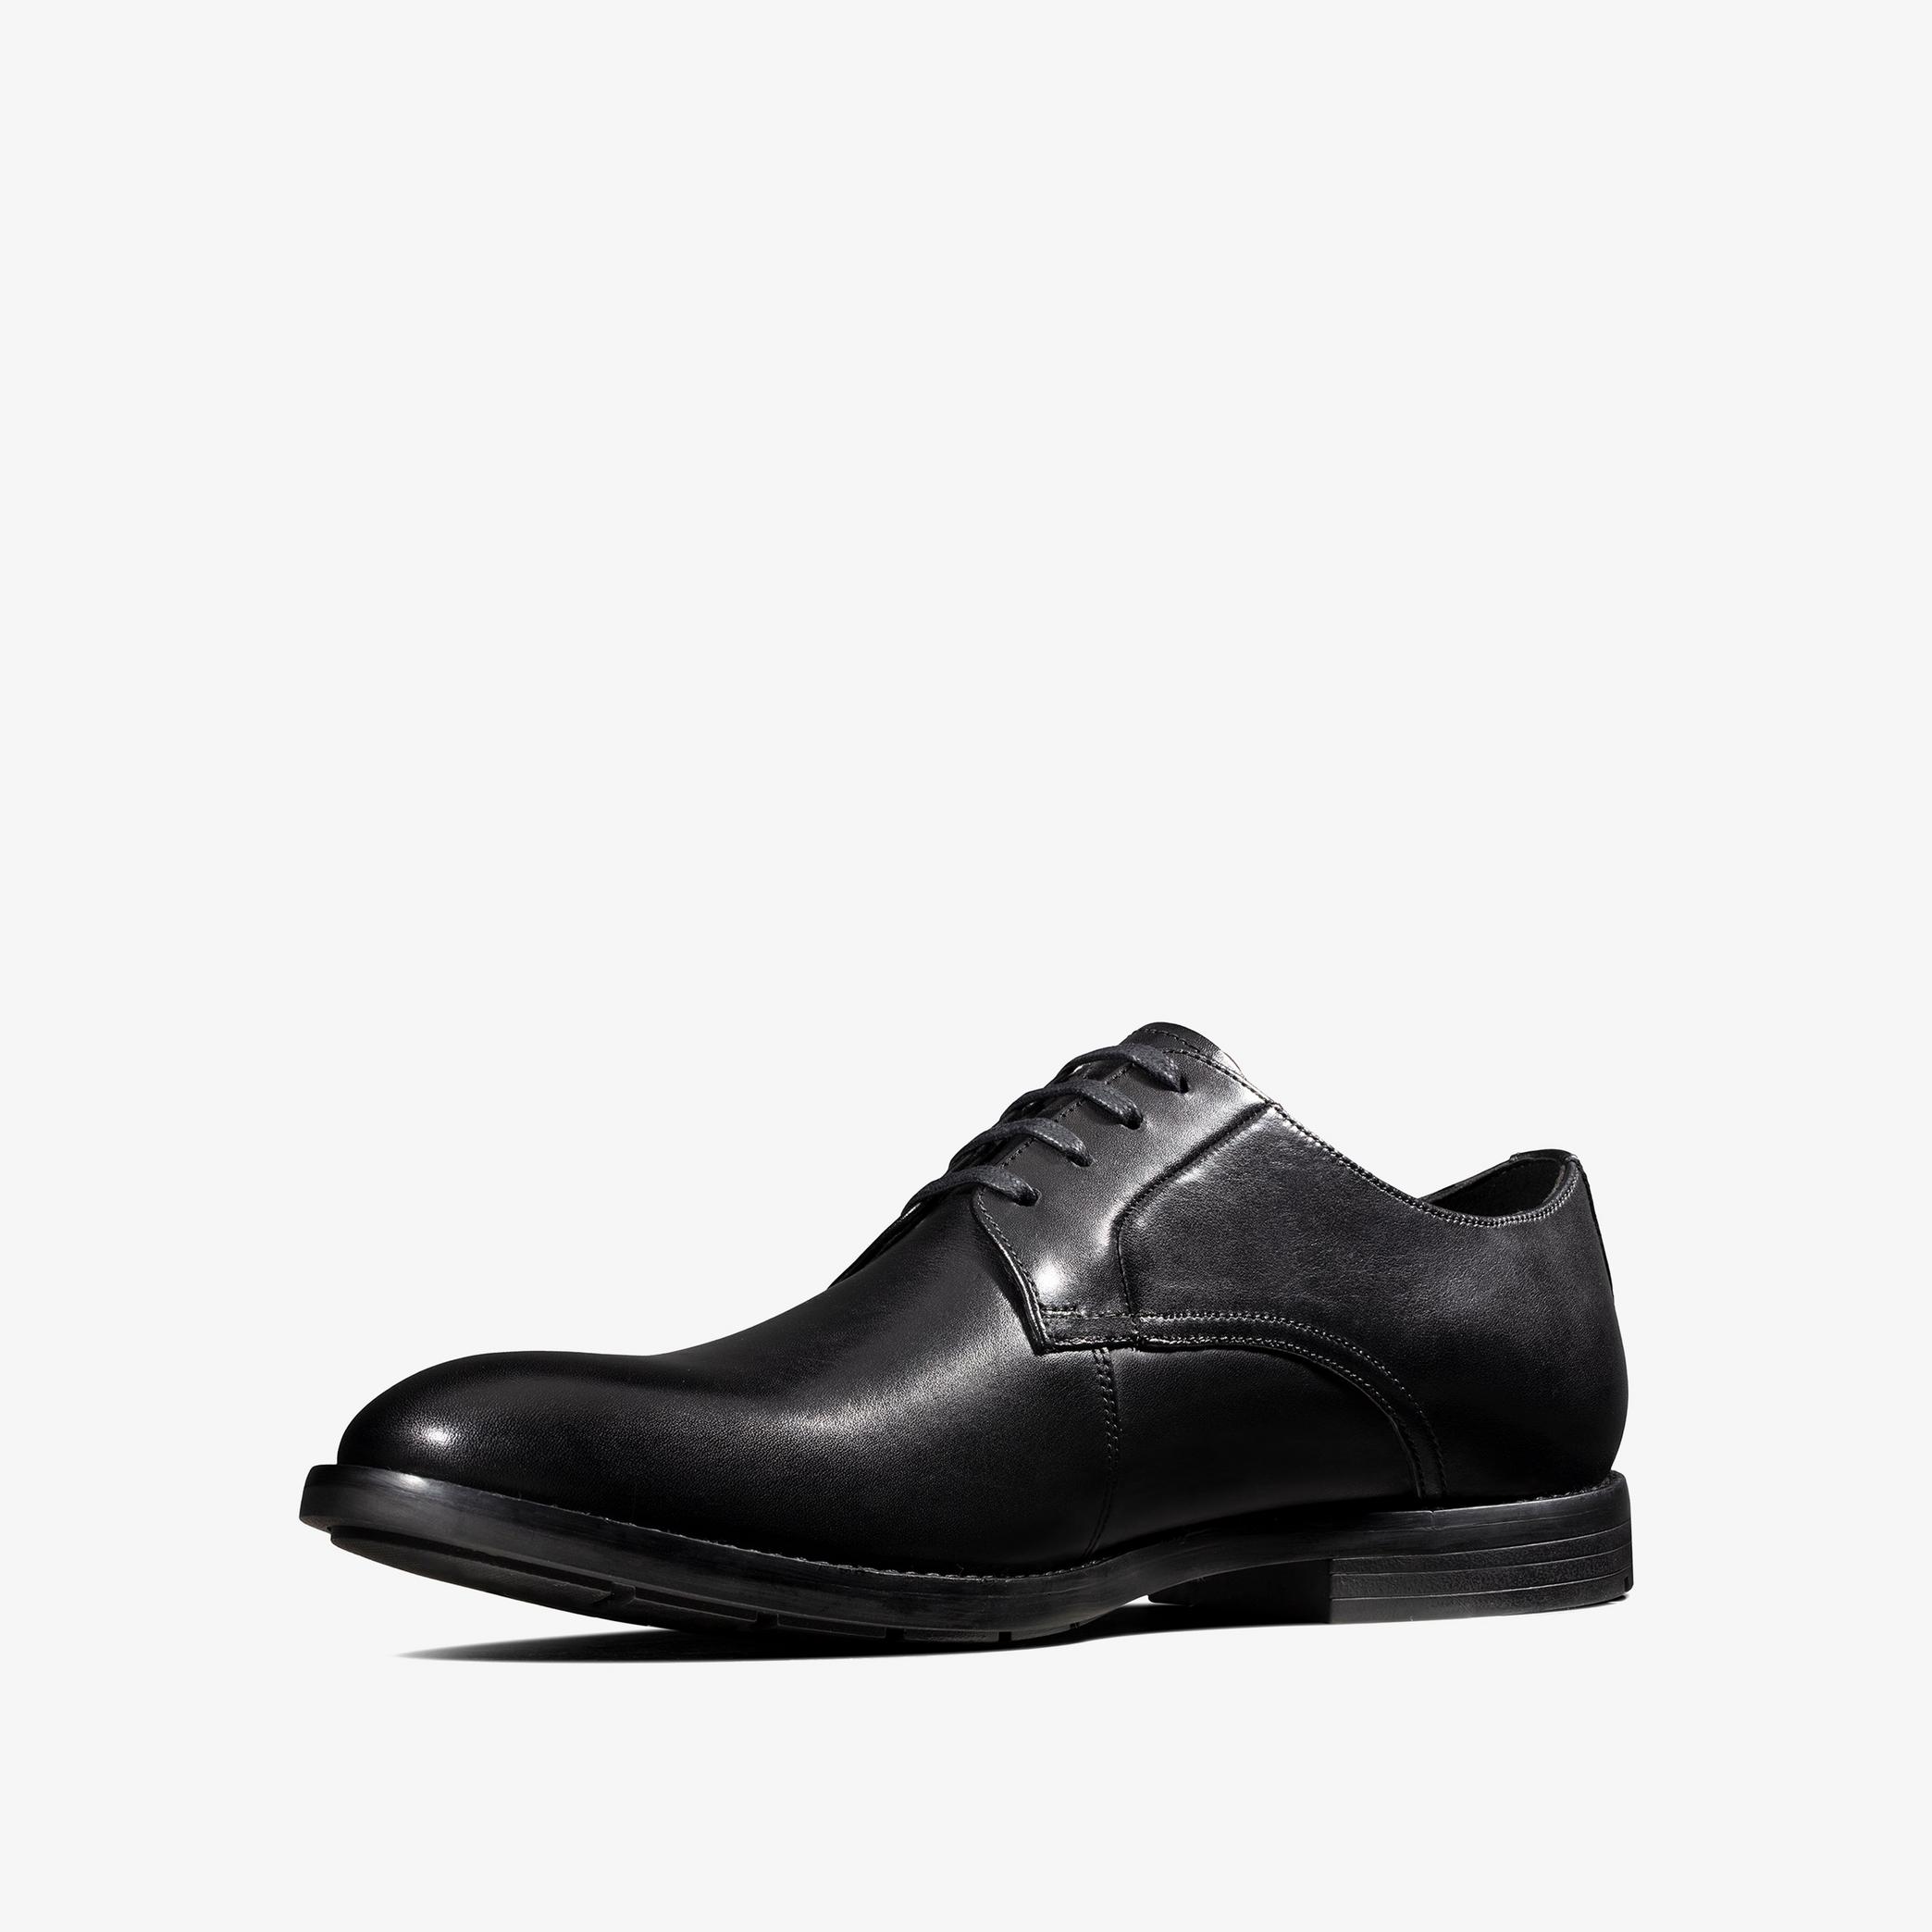 Ronnie Walk Black Leather Derby Shoes, view 4 of 6